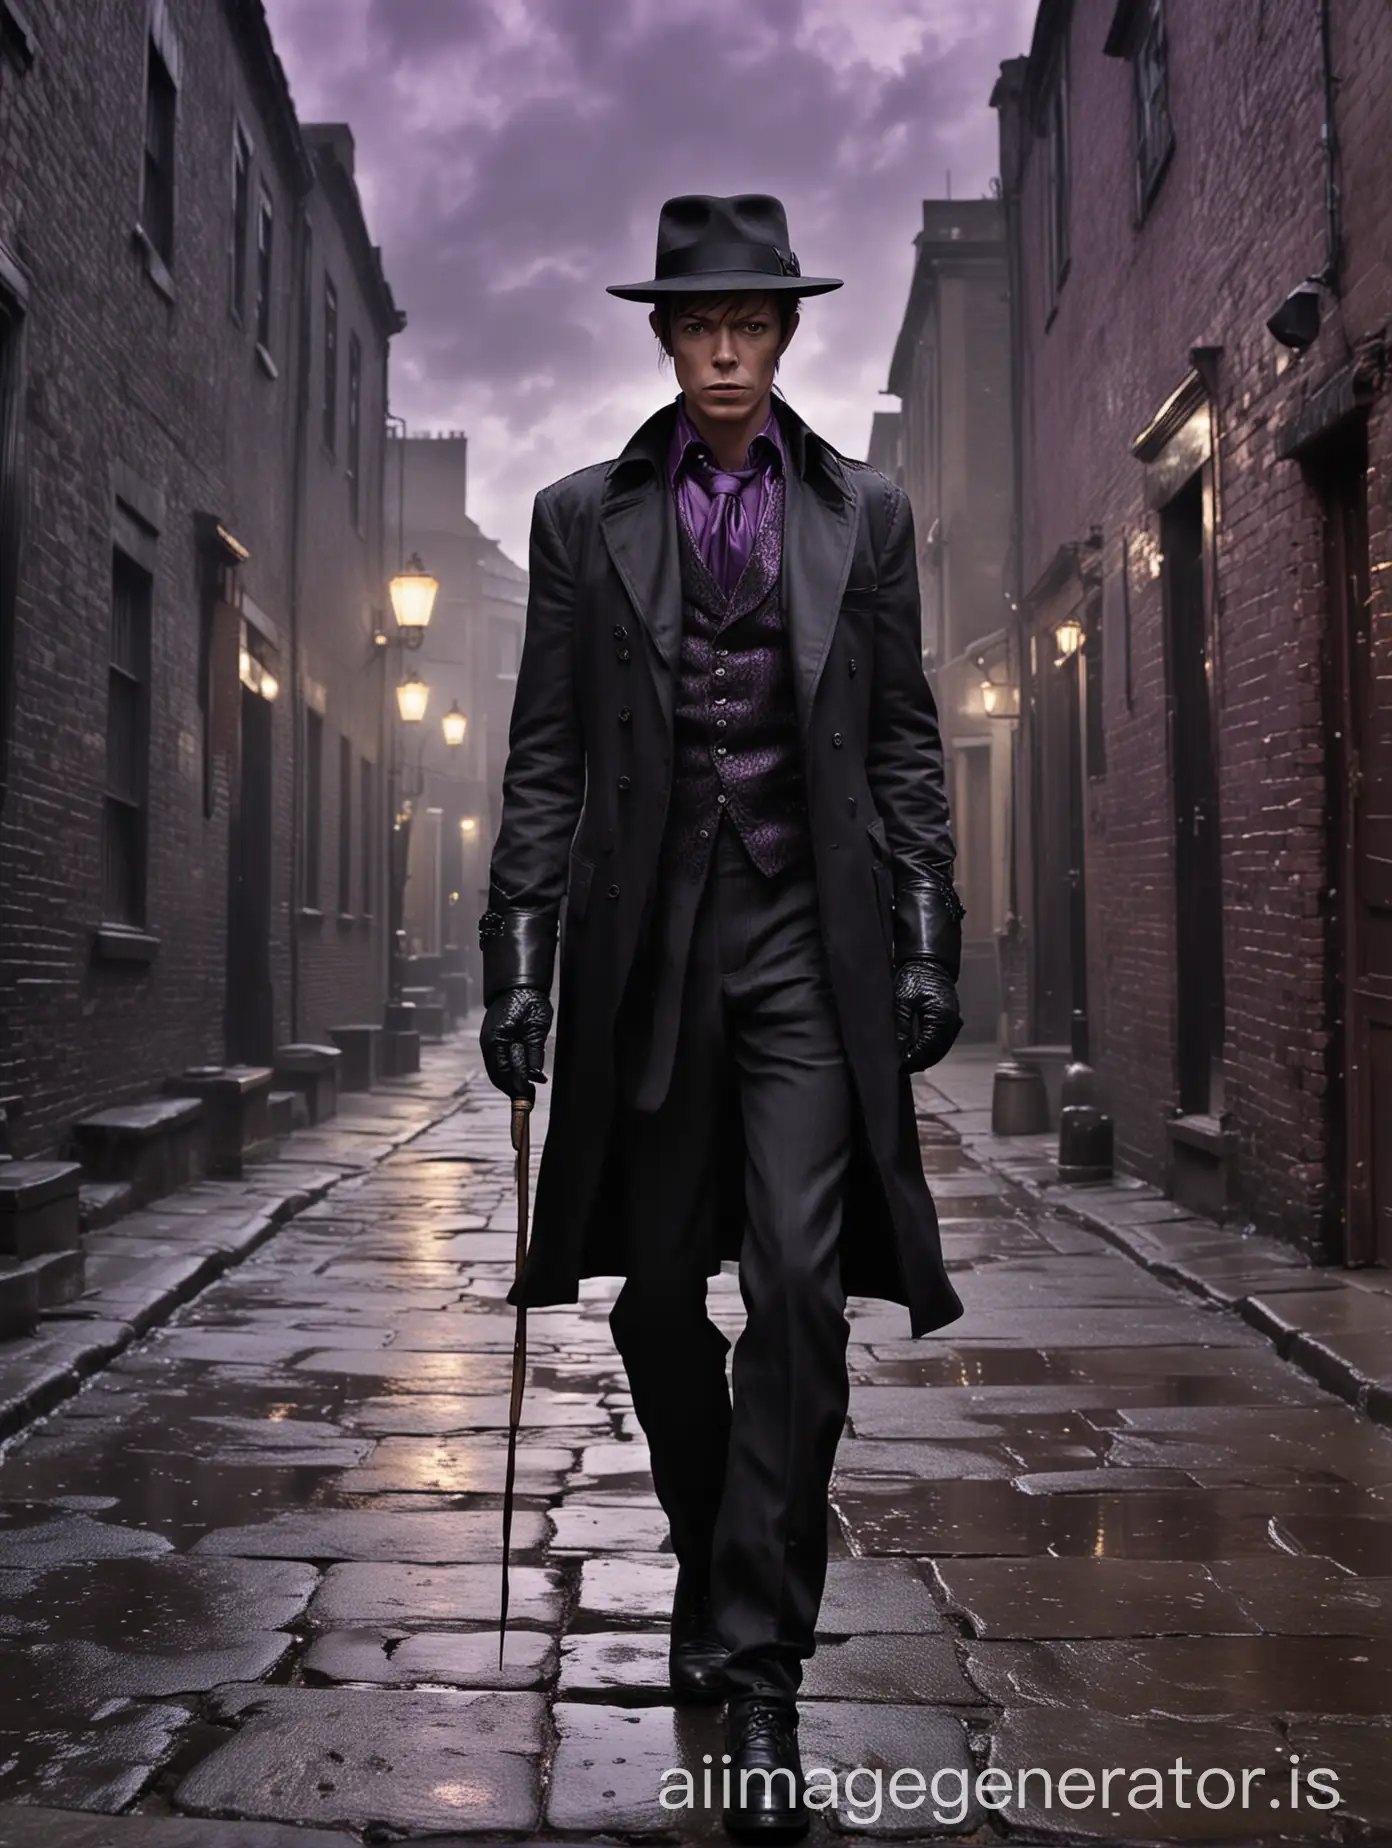 david bowie in his teens, fullbody figure, man walking towards you wearing black leather gloves, black hair, disgust face expression, wearing black fedora hat, juvenile face,  slender young man with a black hair, gentleman's cane, man wearing black linen suit, purple paisley vest,  midnight background with a stormy black clouds, dramatic backlight, old city background, wet stone bricks